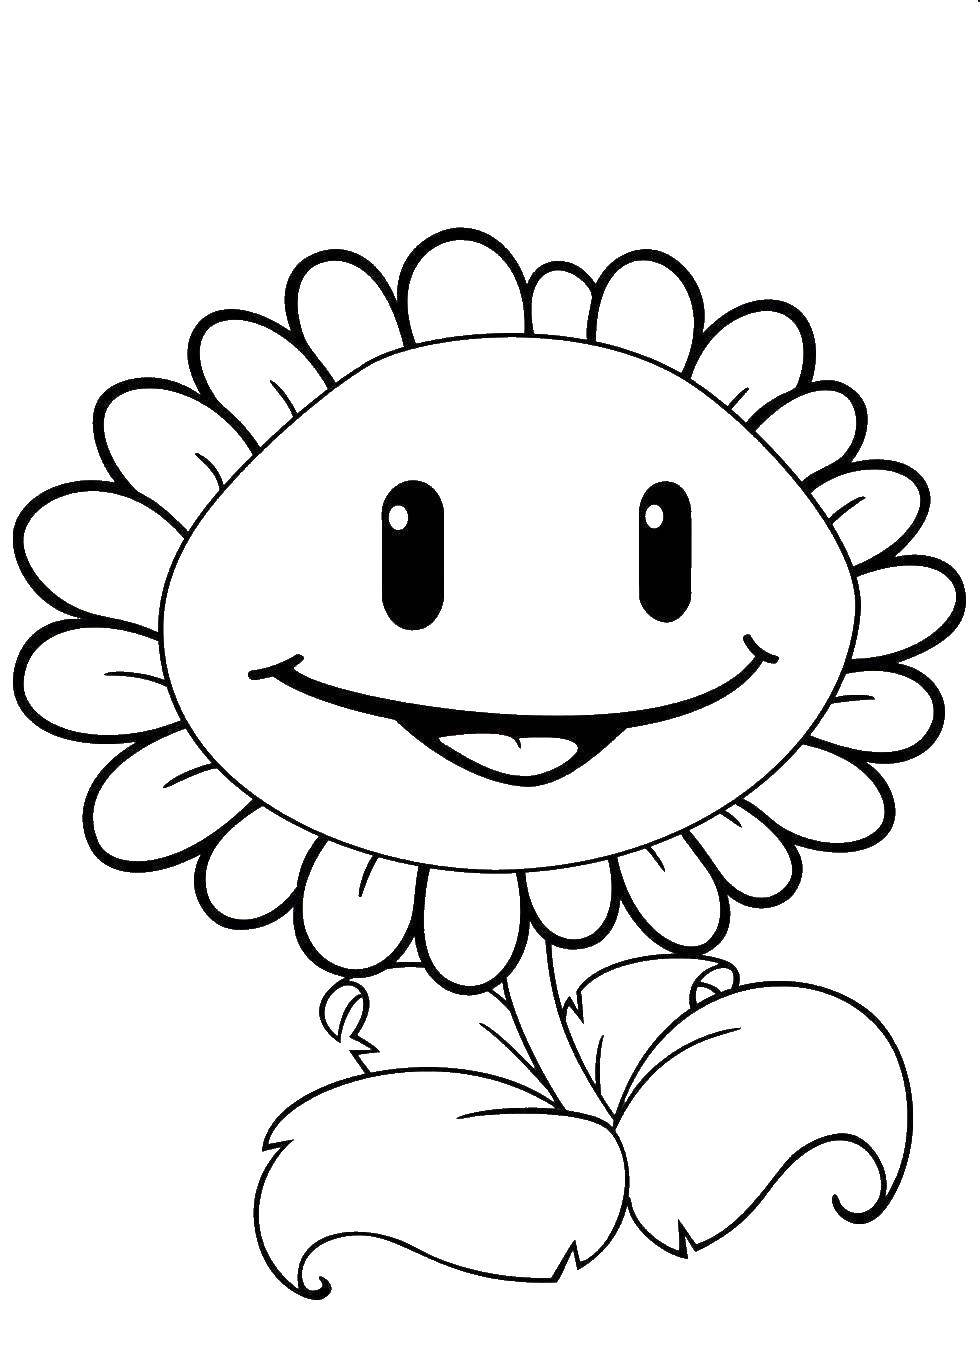 Coloring Game zombie vs plants . Category Zombie vs plants. Tags:  Games.